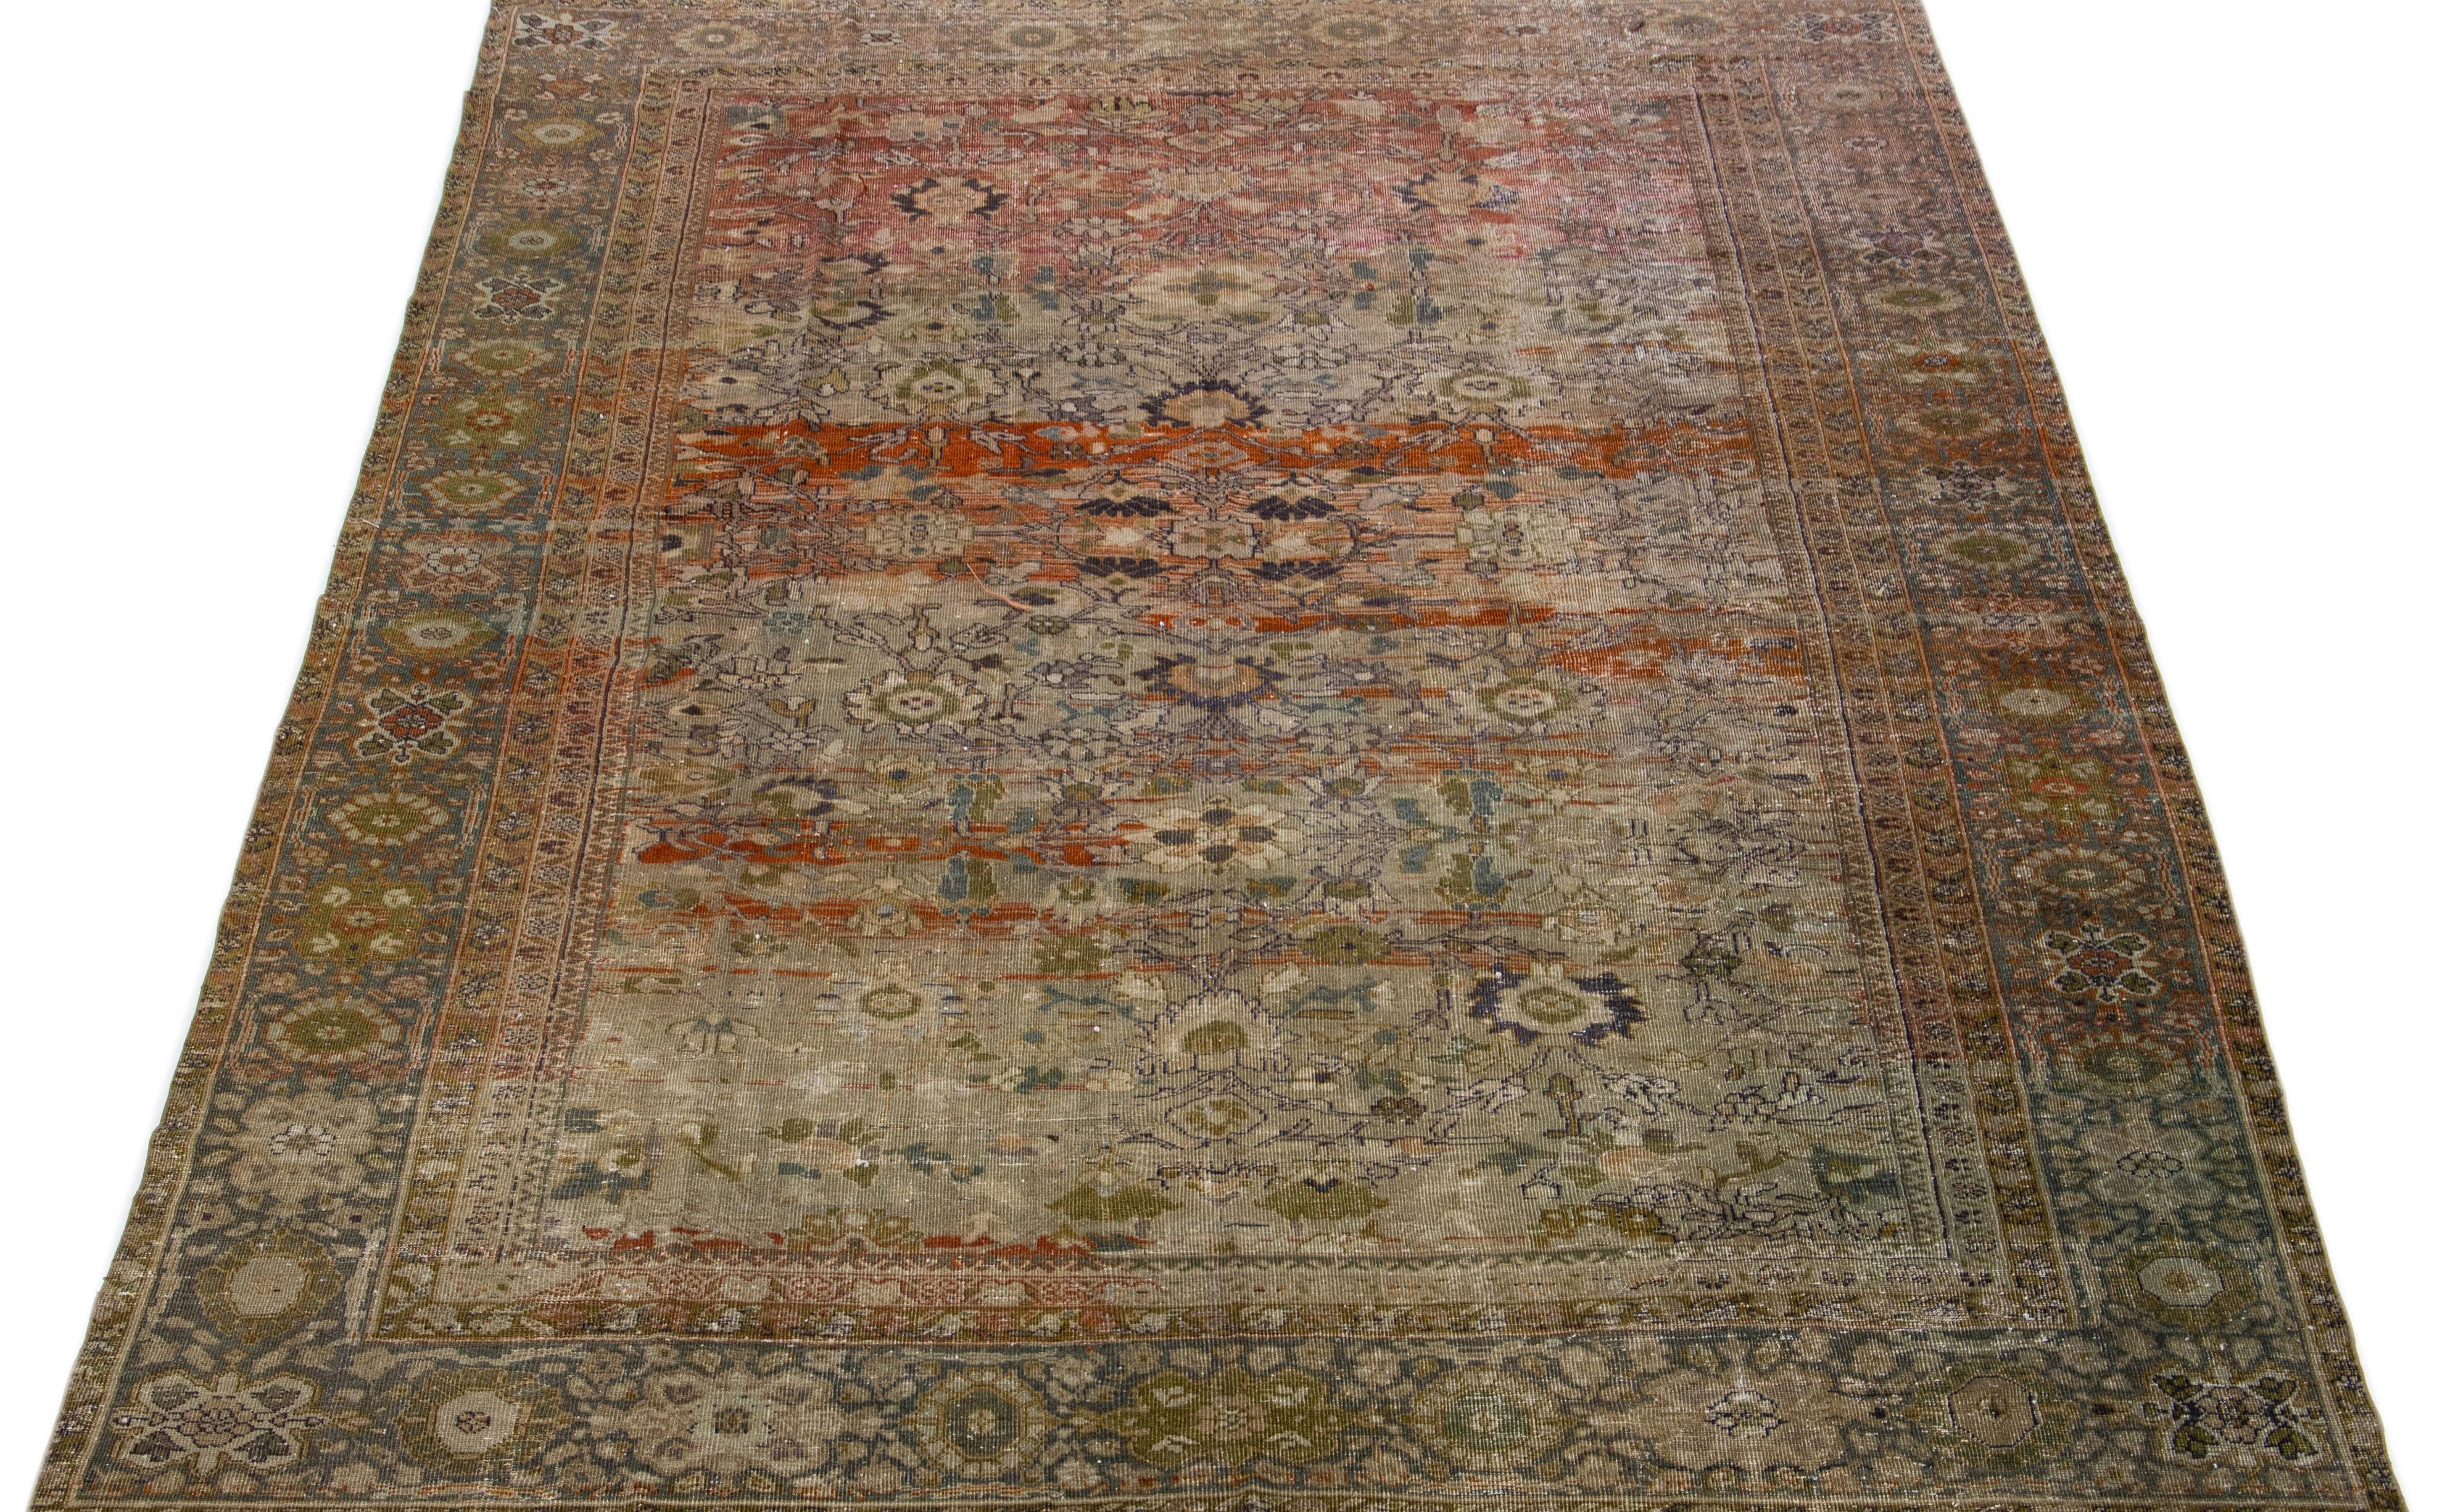 Beautiful hand knotted 1900s antique Sultanabad wool rug with a brown color field. This Persian rug has rust, green, and gray accent colors in an all-over floral design. This Classic rug design is made to last with a strong wool weave from